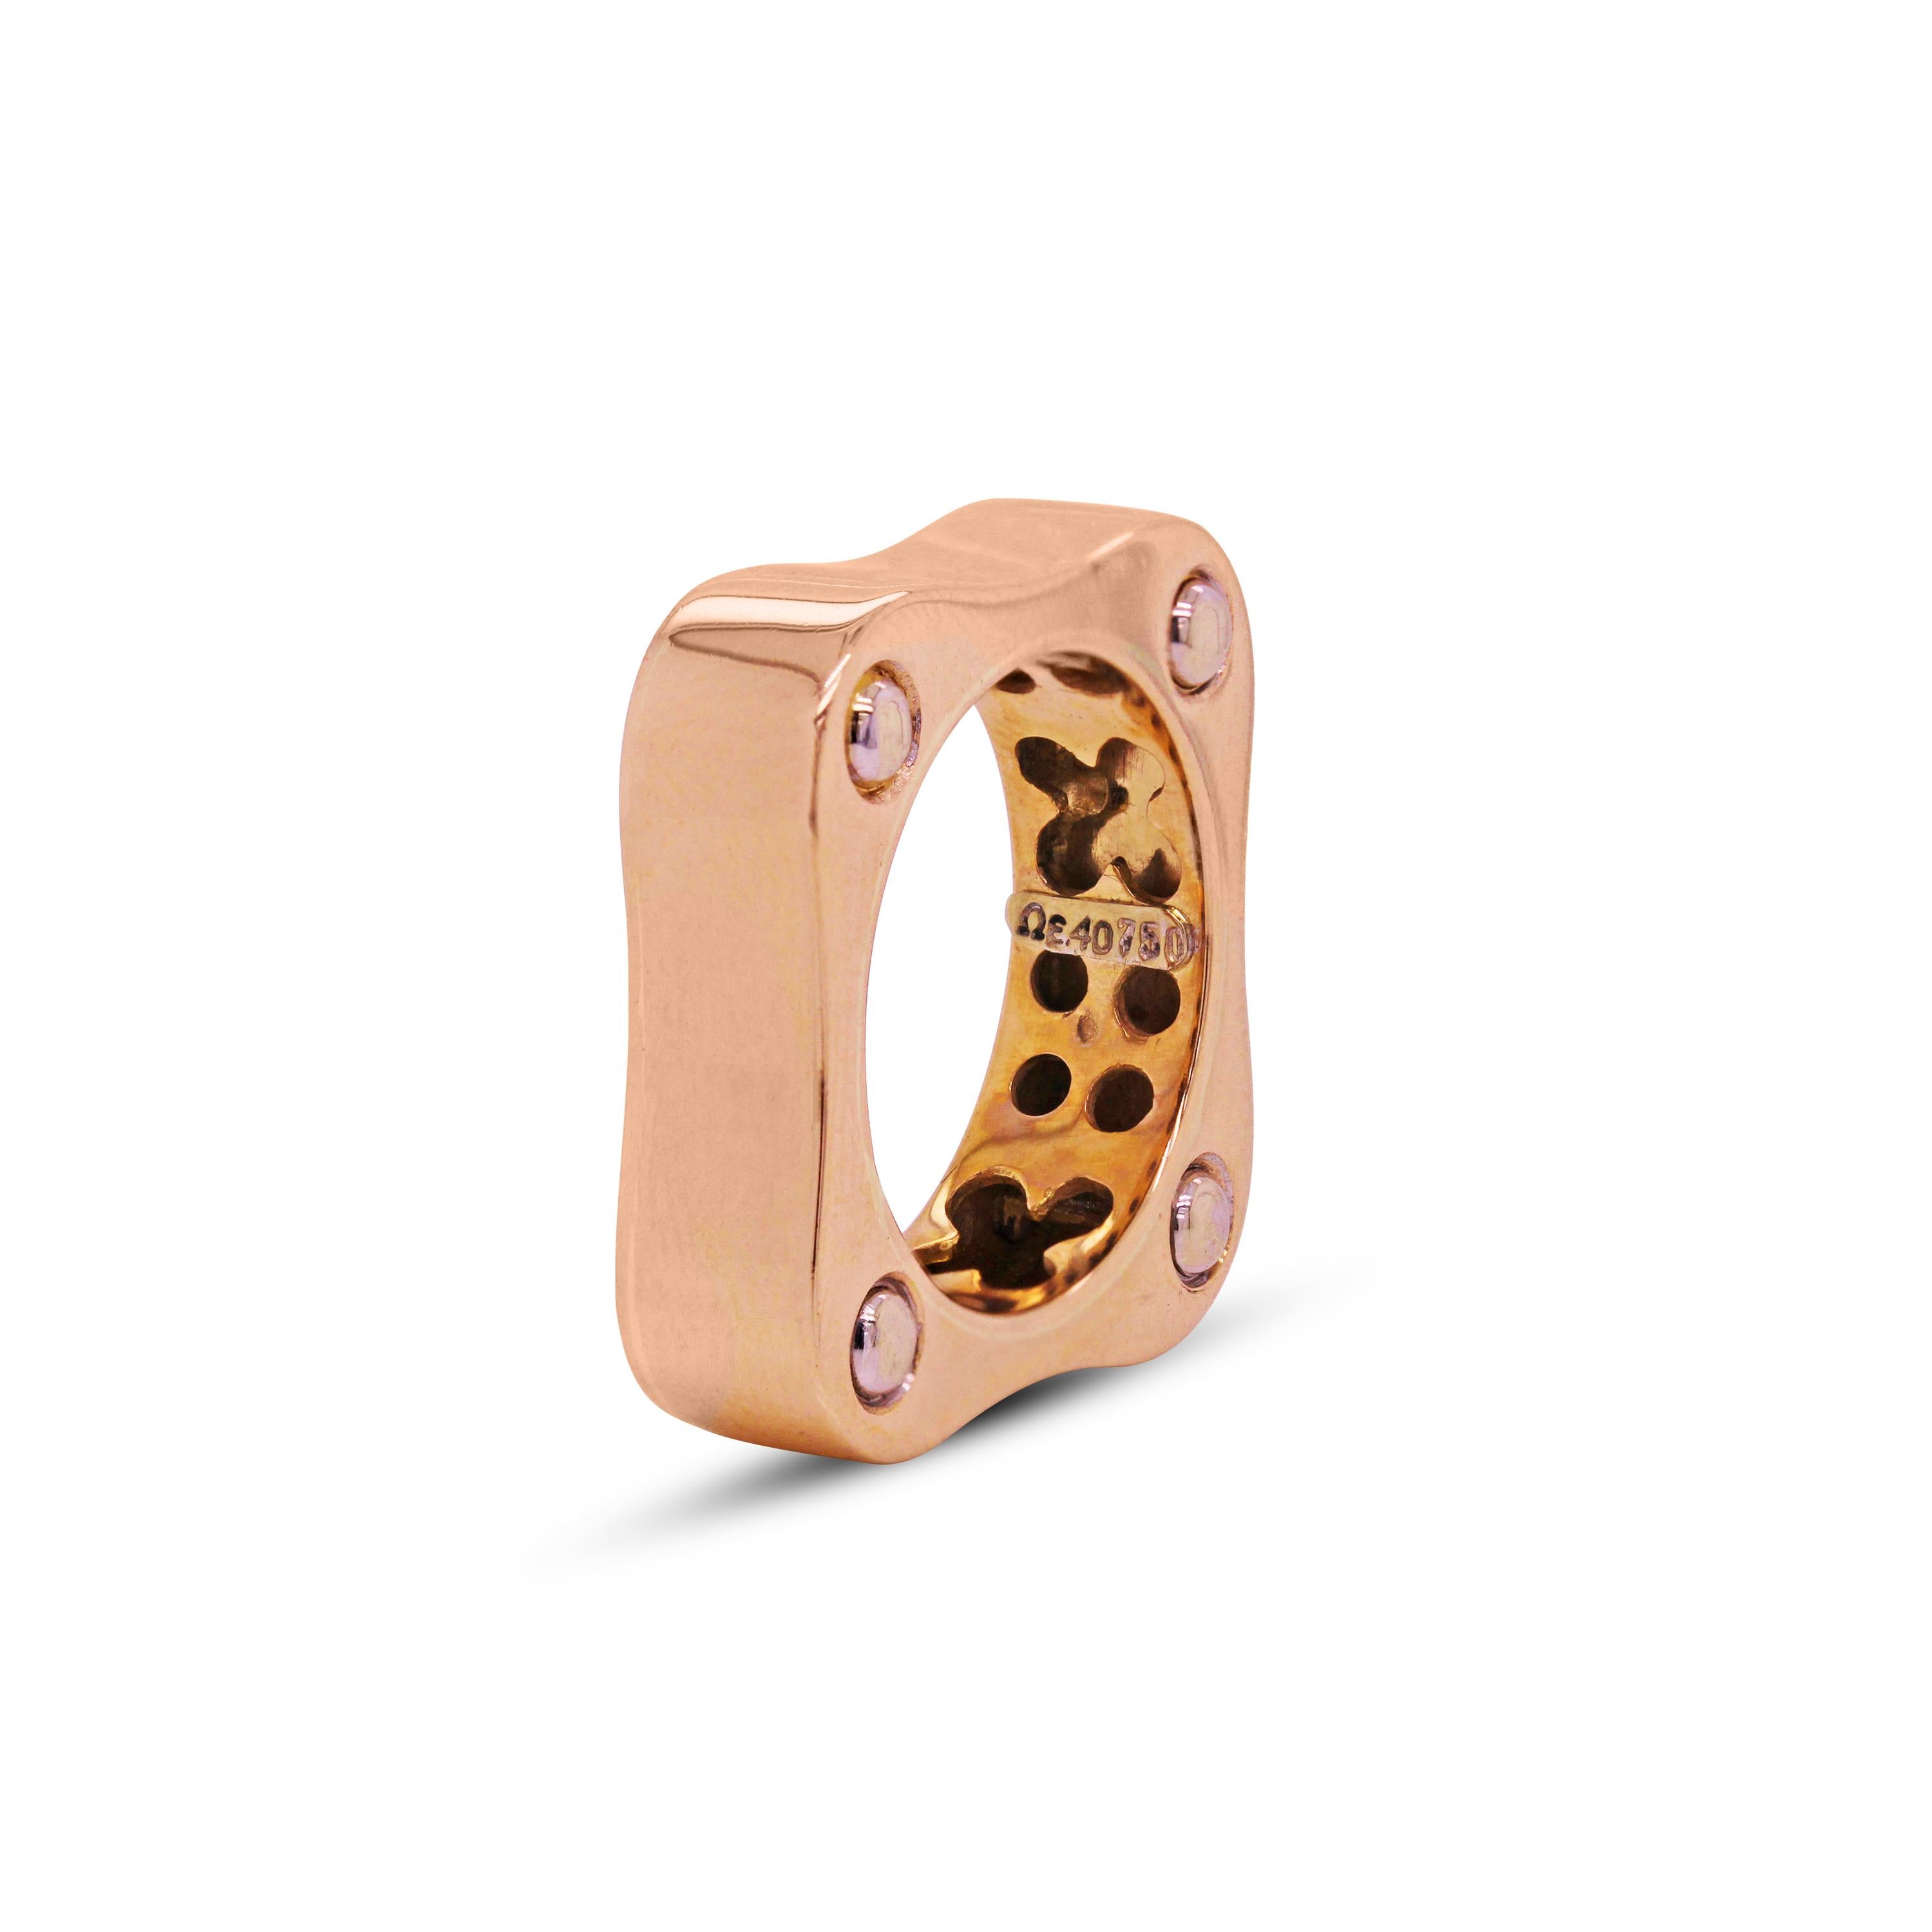 18K Rose Gold Square Band Ring by Omega

This unique band ring features beautiful curves and symmetry to bring together this original design in a square like shape.

Ring is 6mm in width. Size 6.